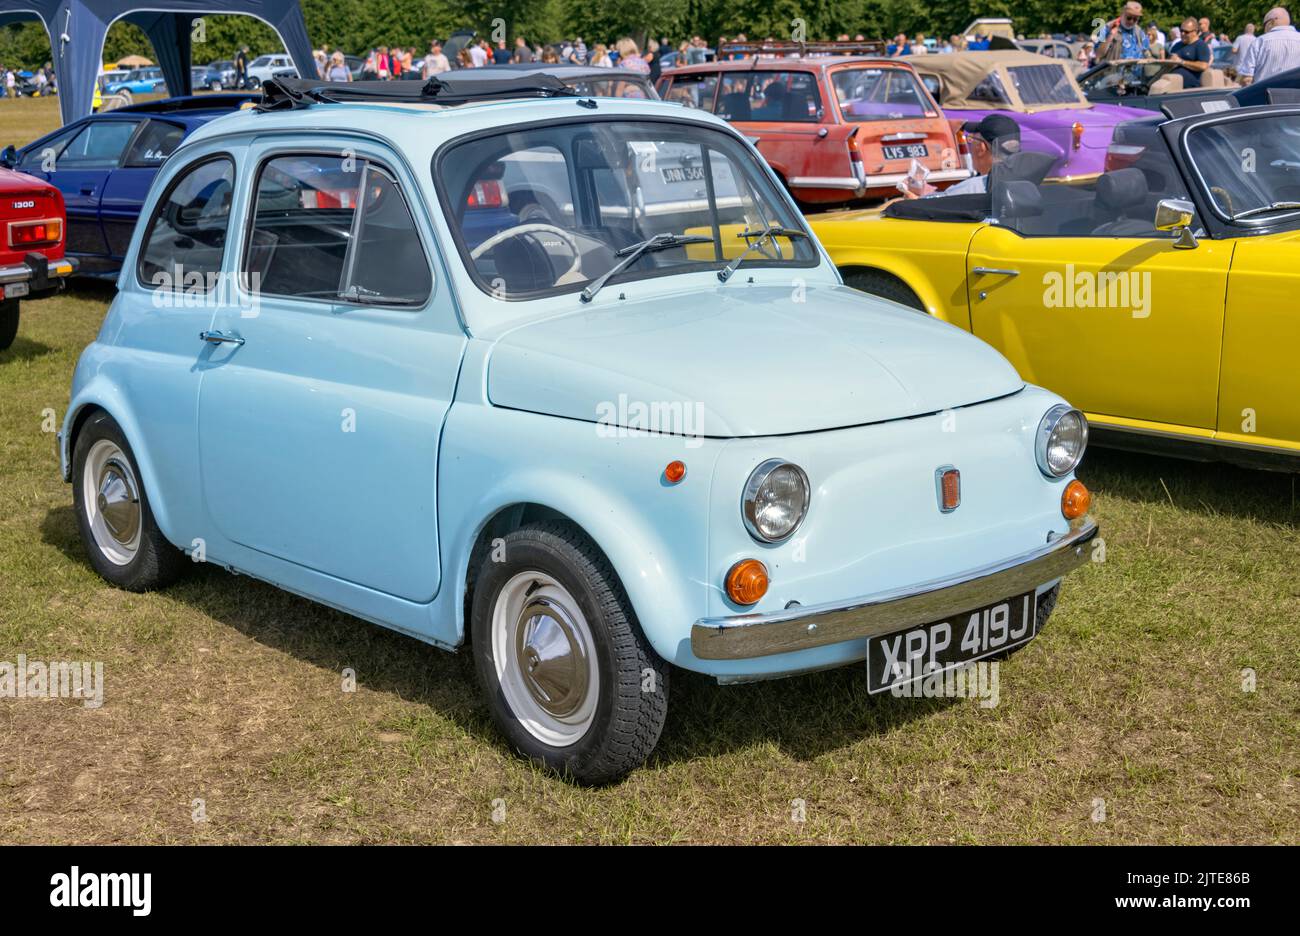 Light Blue Fiat 500 Classic Car at Knebworth House Classic Car Show Stock Photo